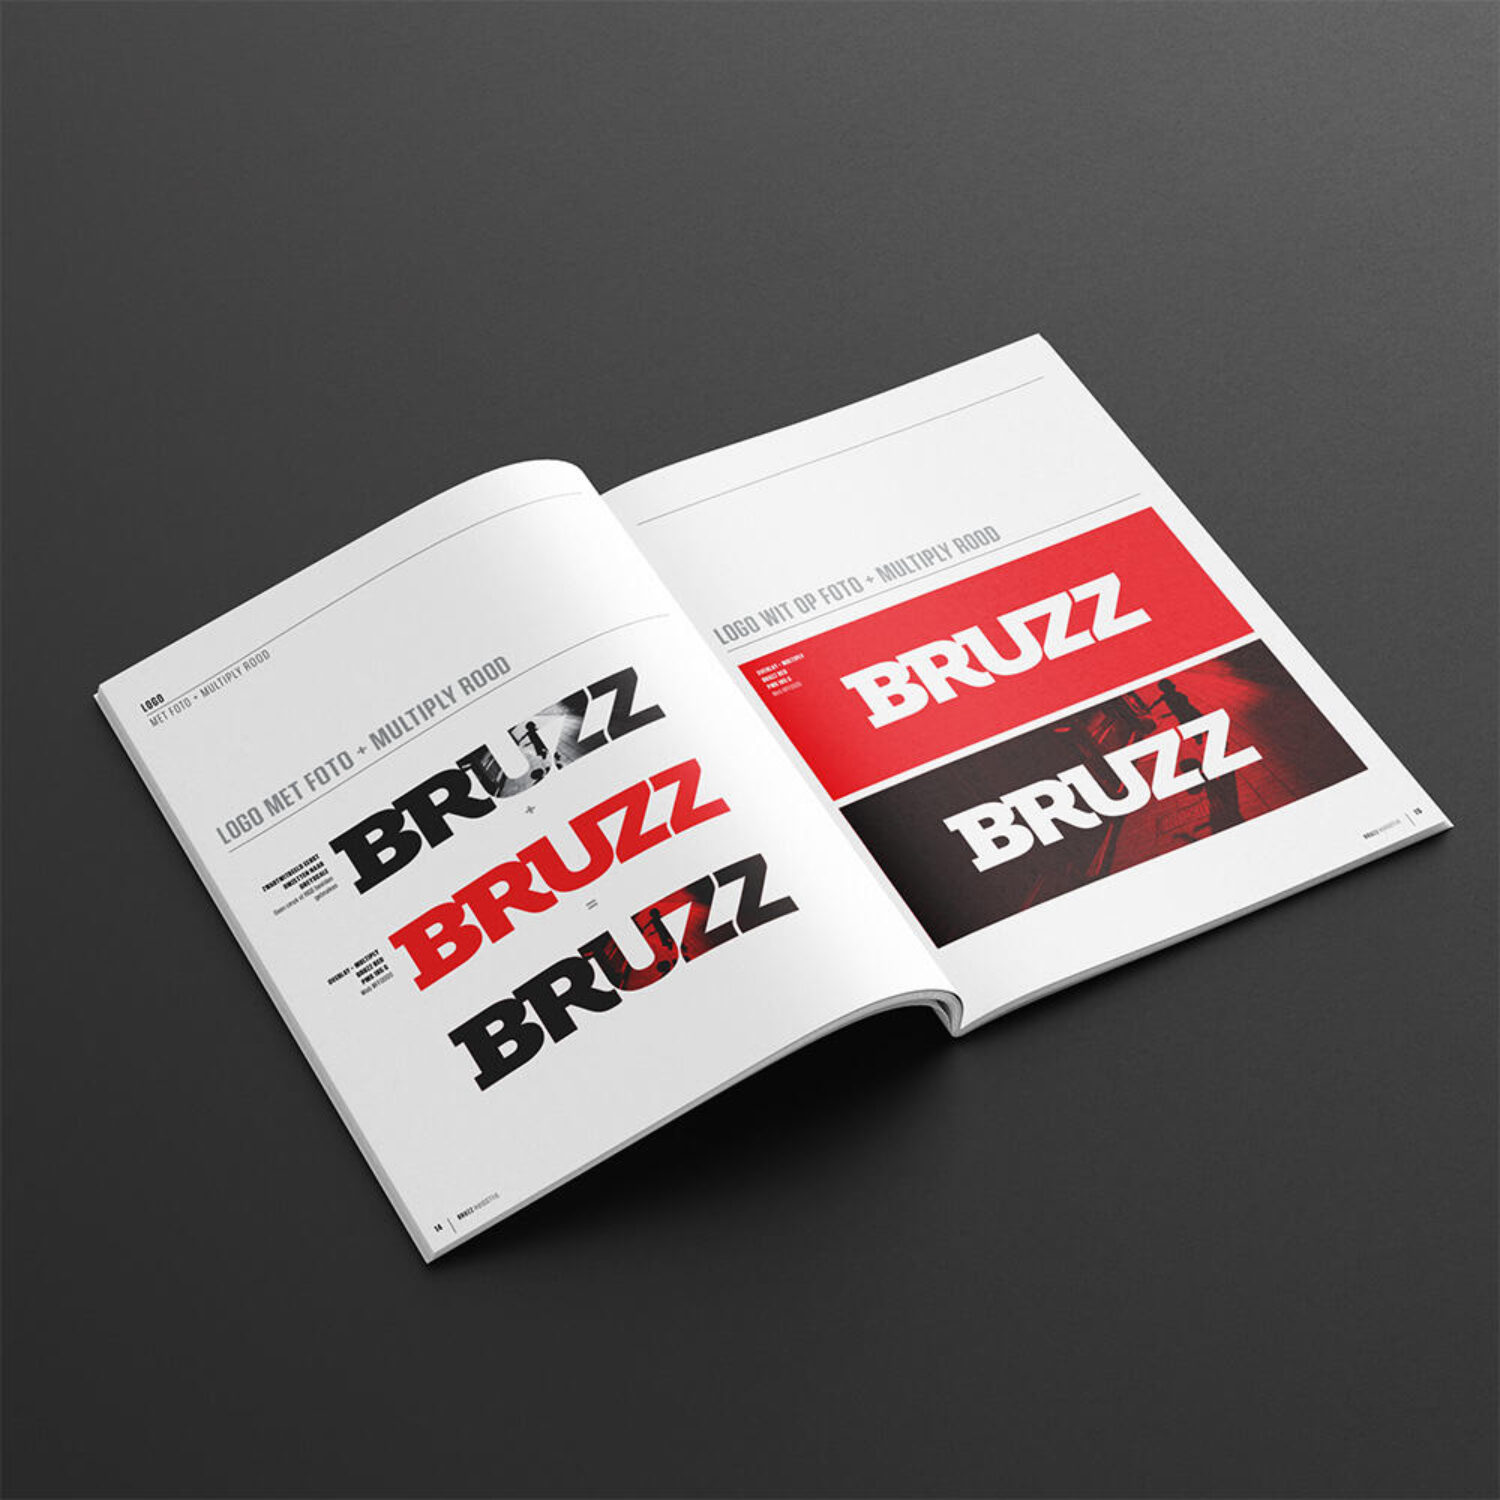 BRZ_guidelines_SQUARE_02